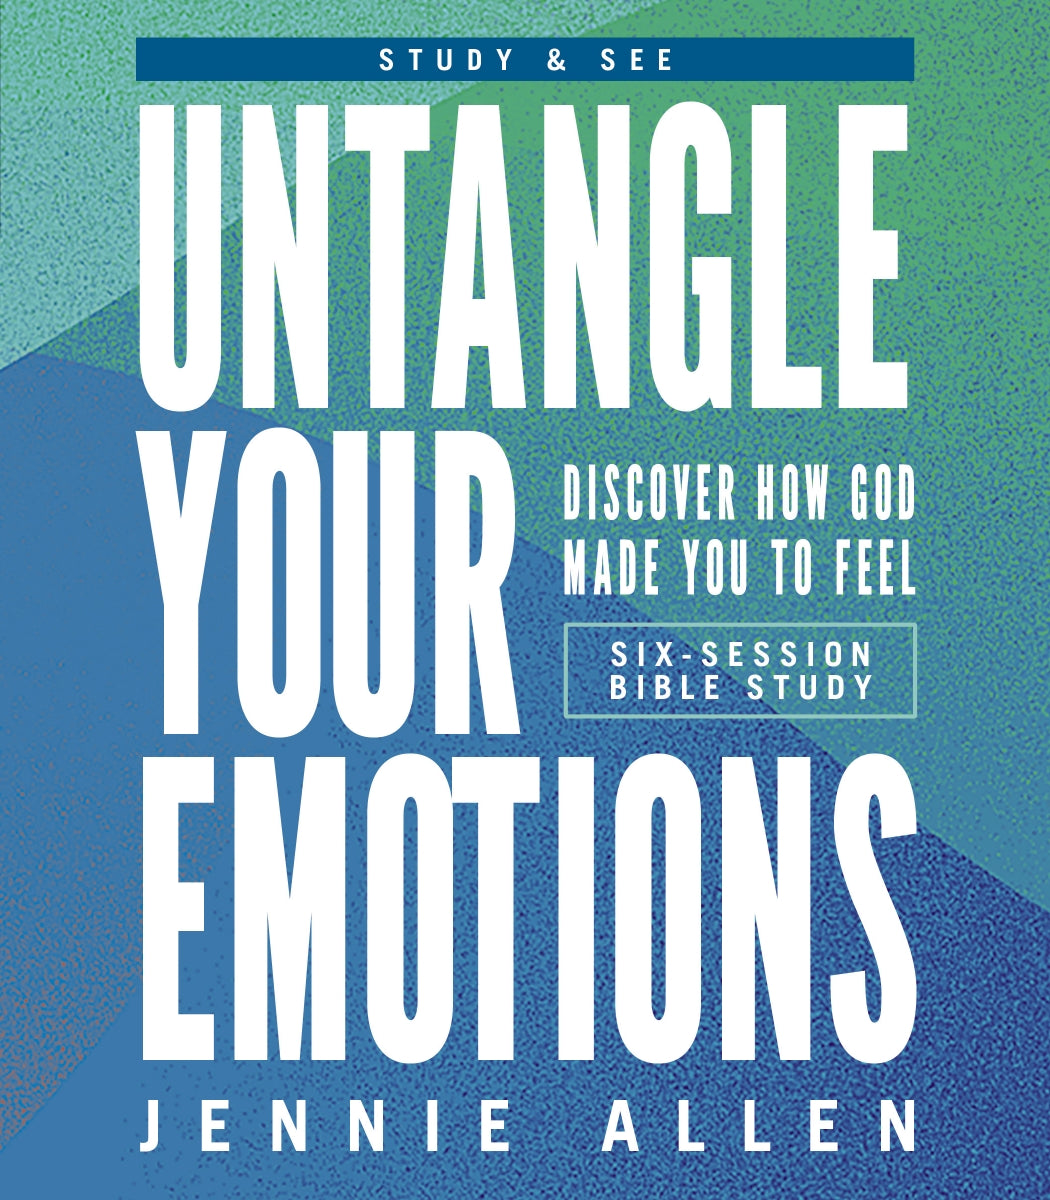 What Are You Feeling?: A picture book of your emotions